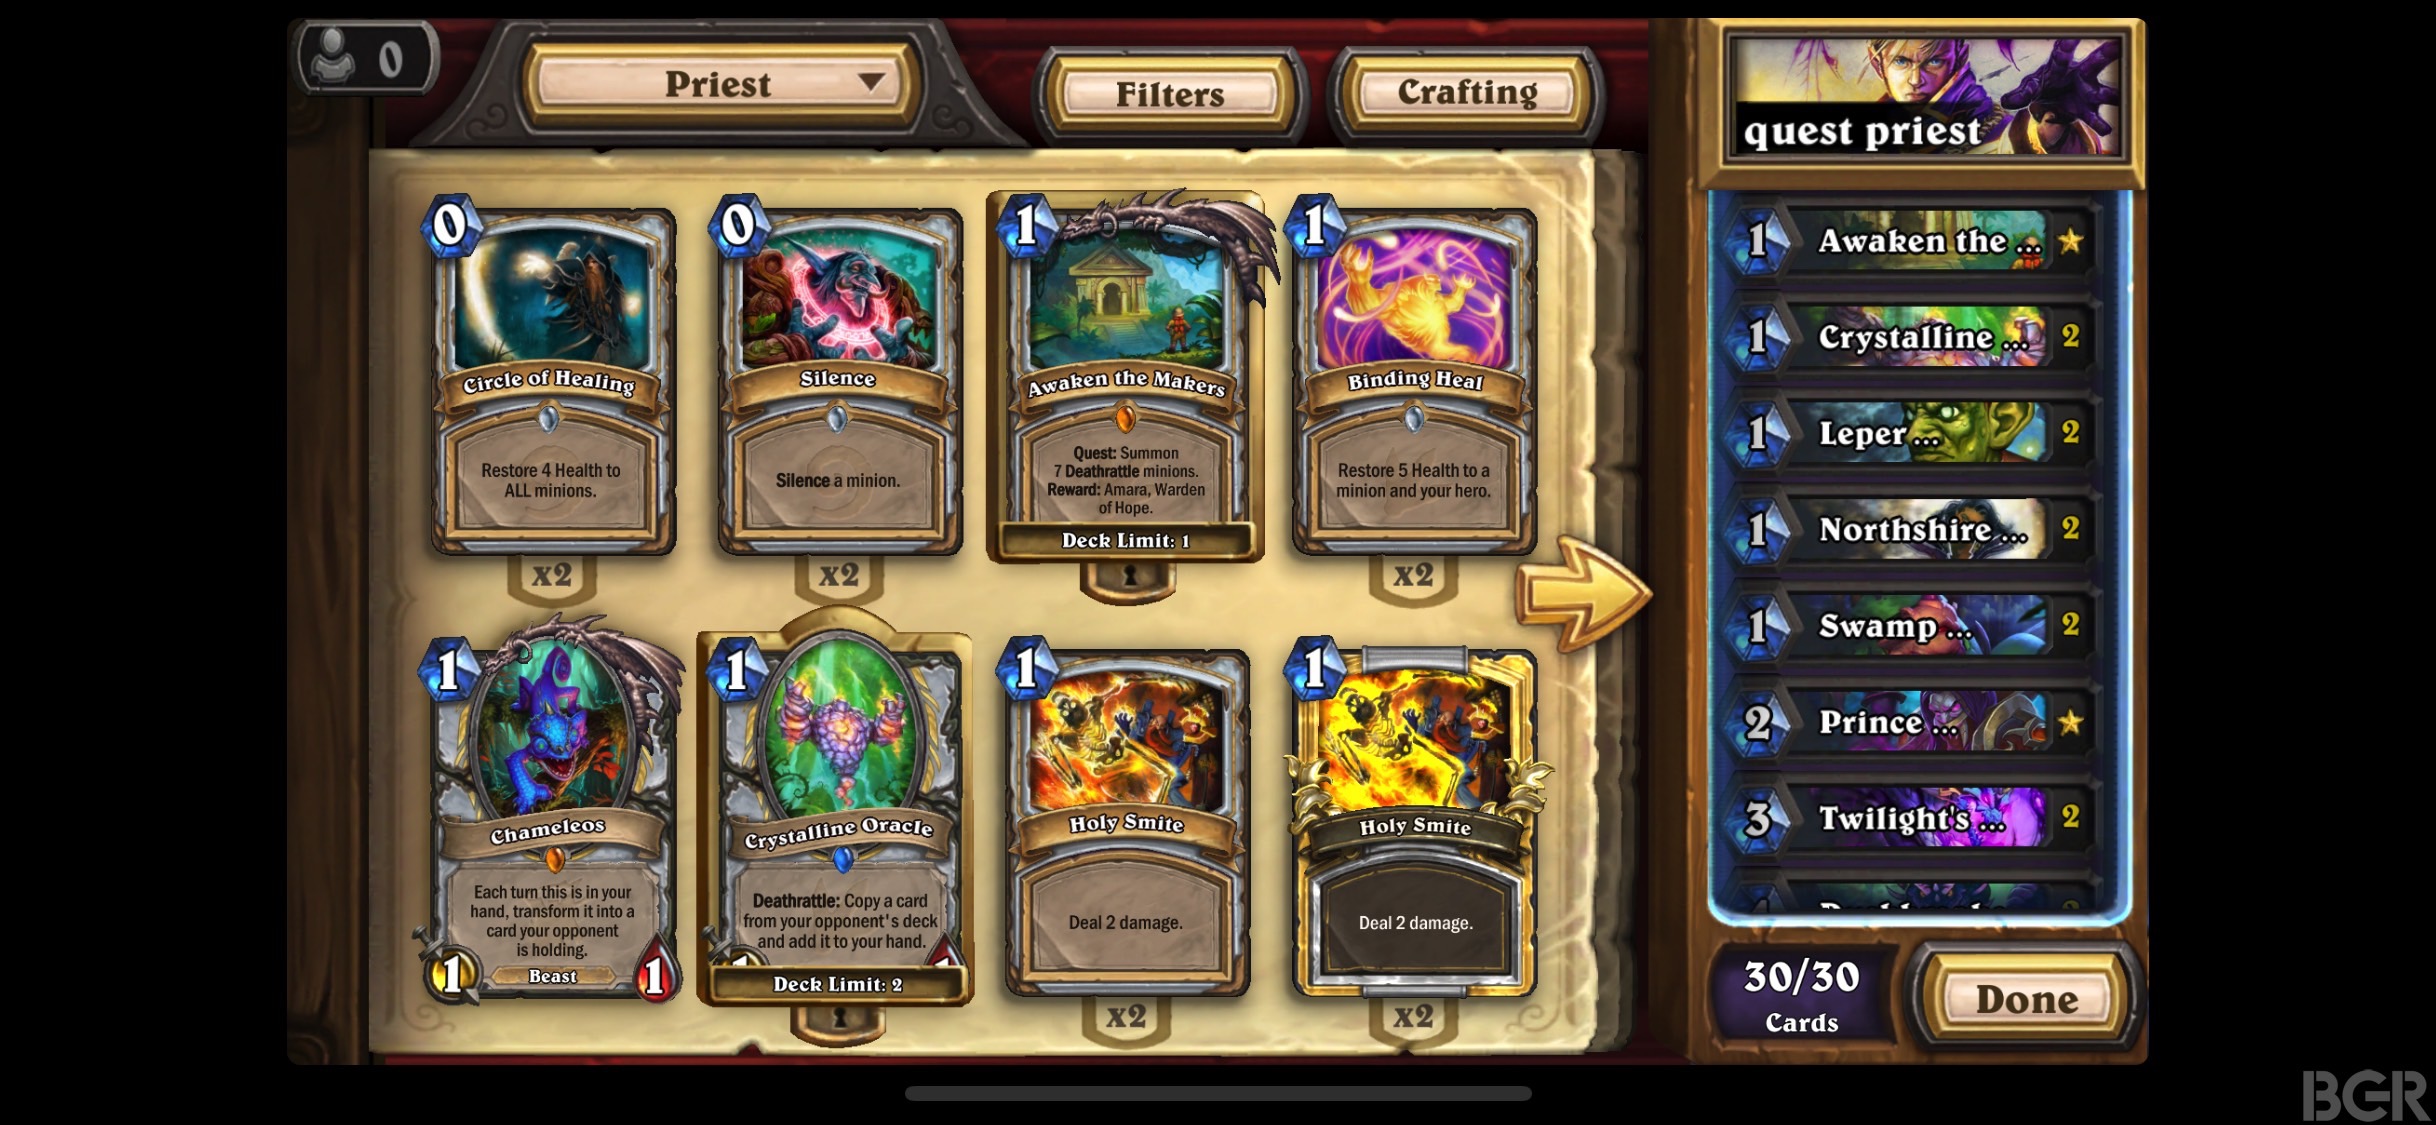 why wont my iphone download hearthstone